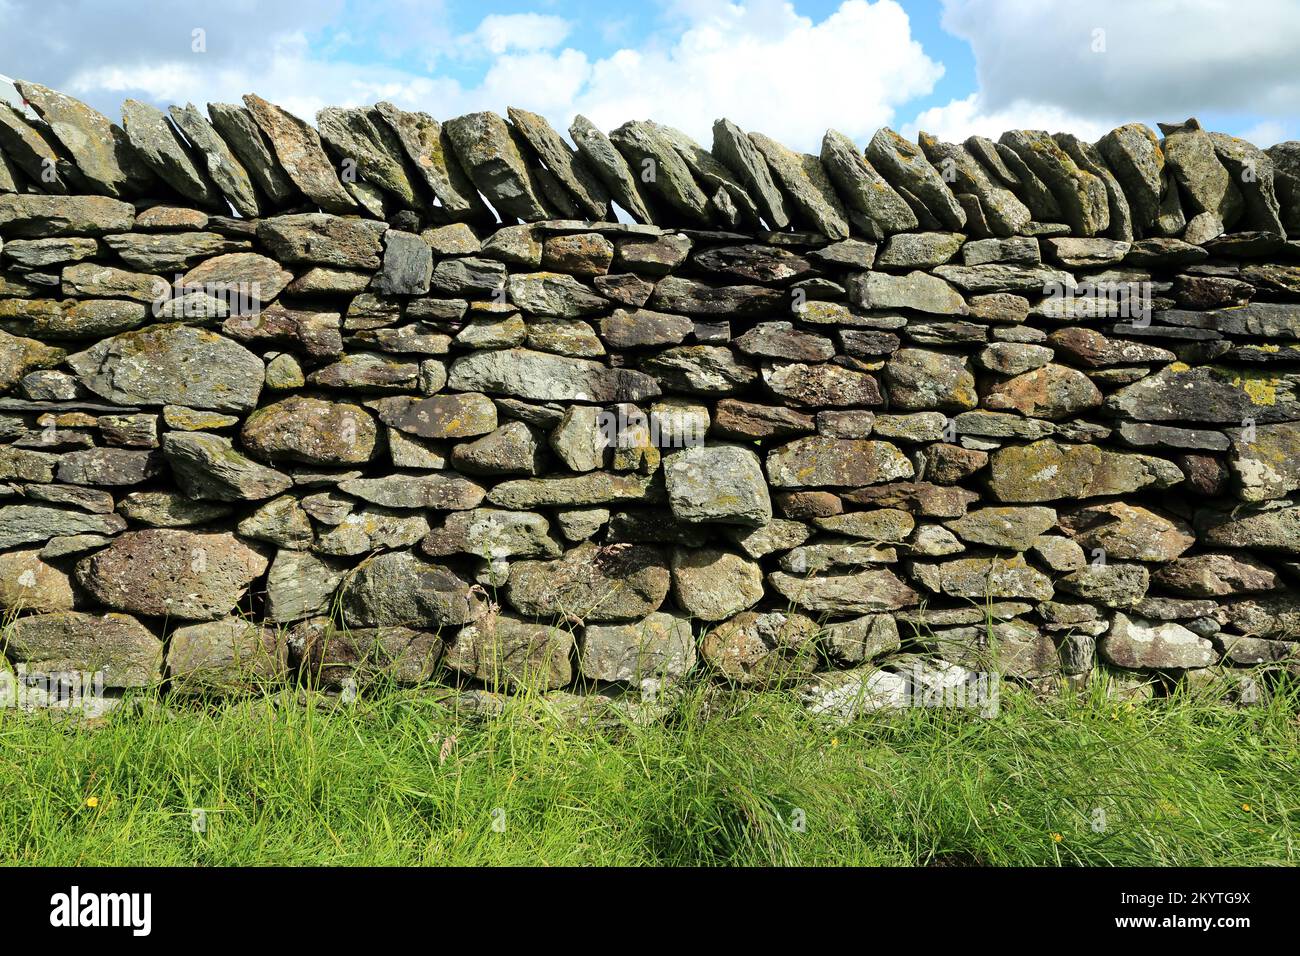 Example of volcanic dry stone wall from Borrowdale in the central Cumbrian fells of Cumbria, England - made from igneous volcanic rock Stock Photo